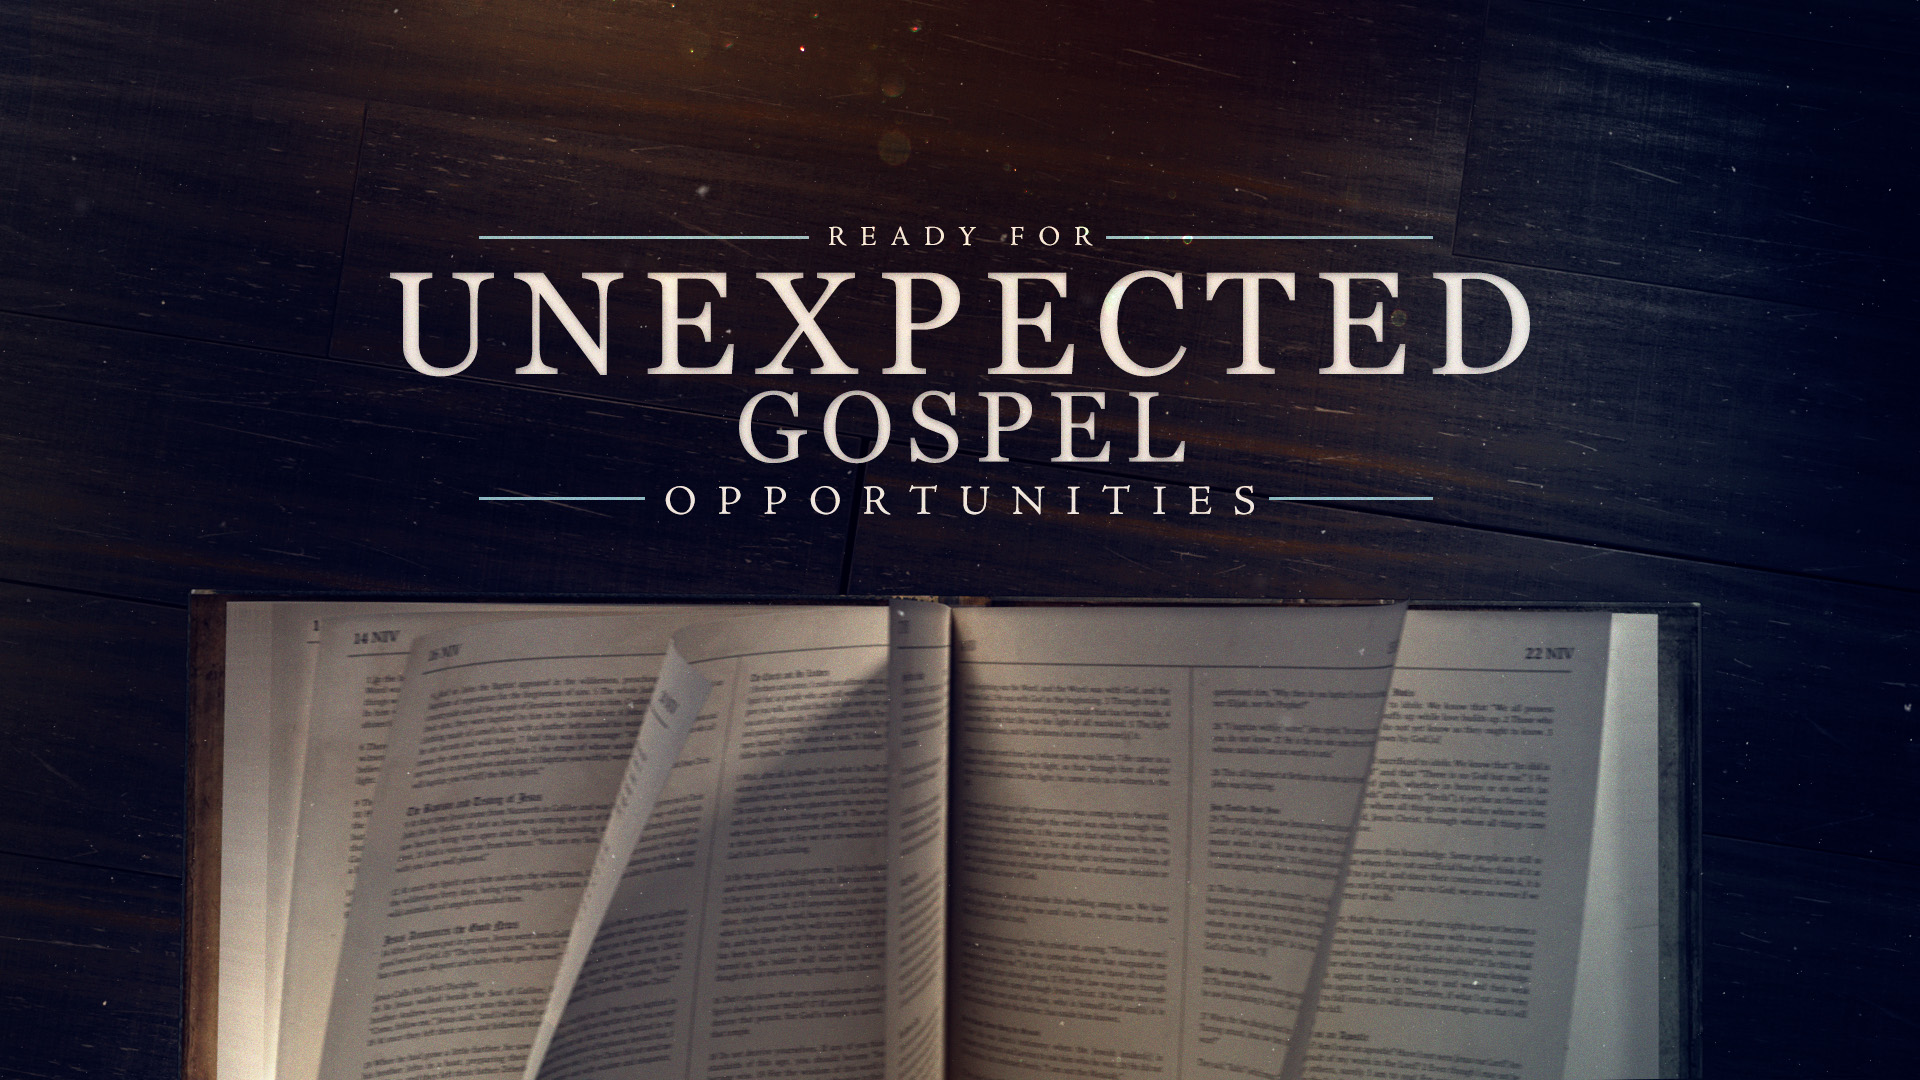 Ready for Unexpected Gospel Opportunites